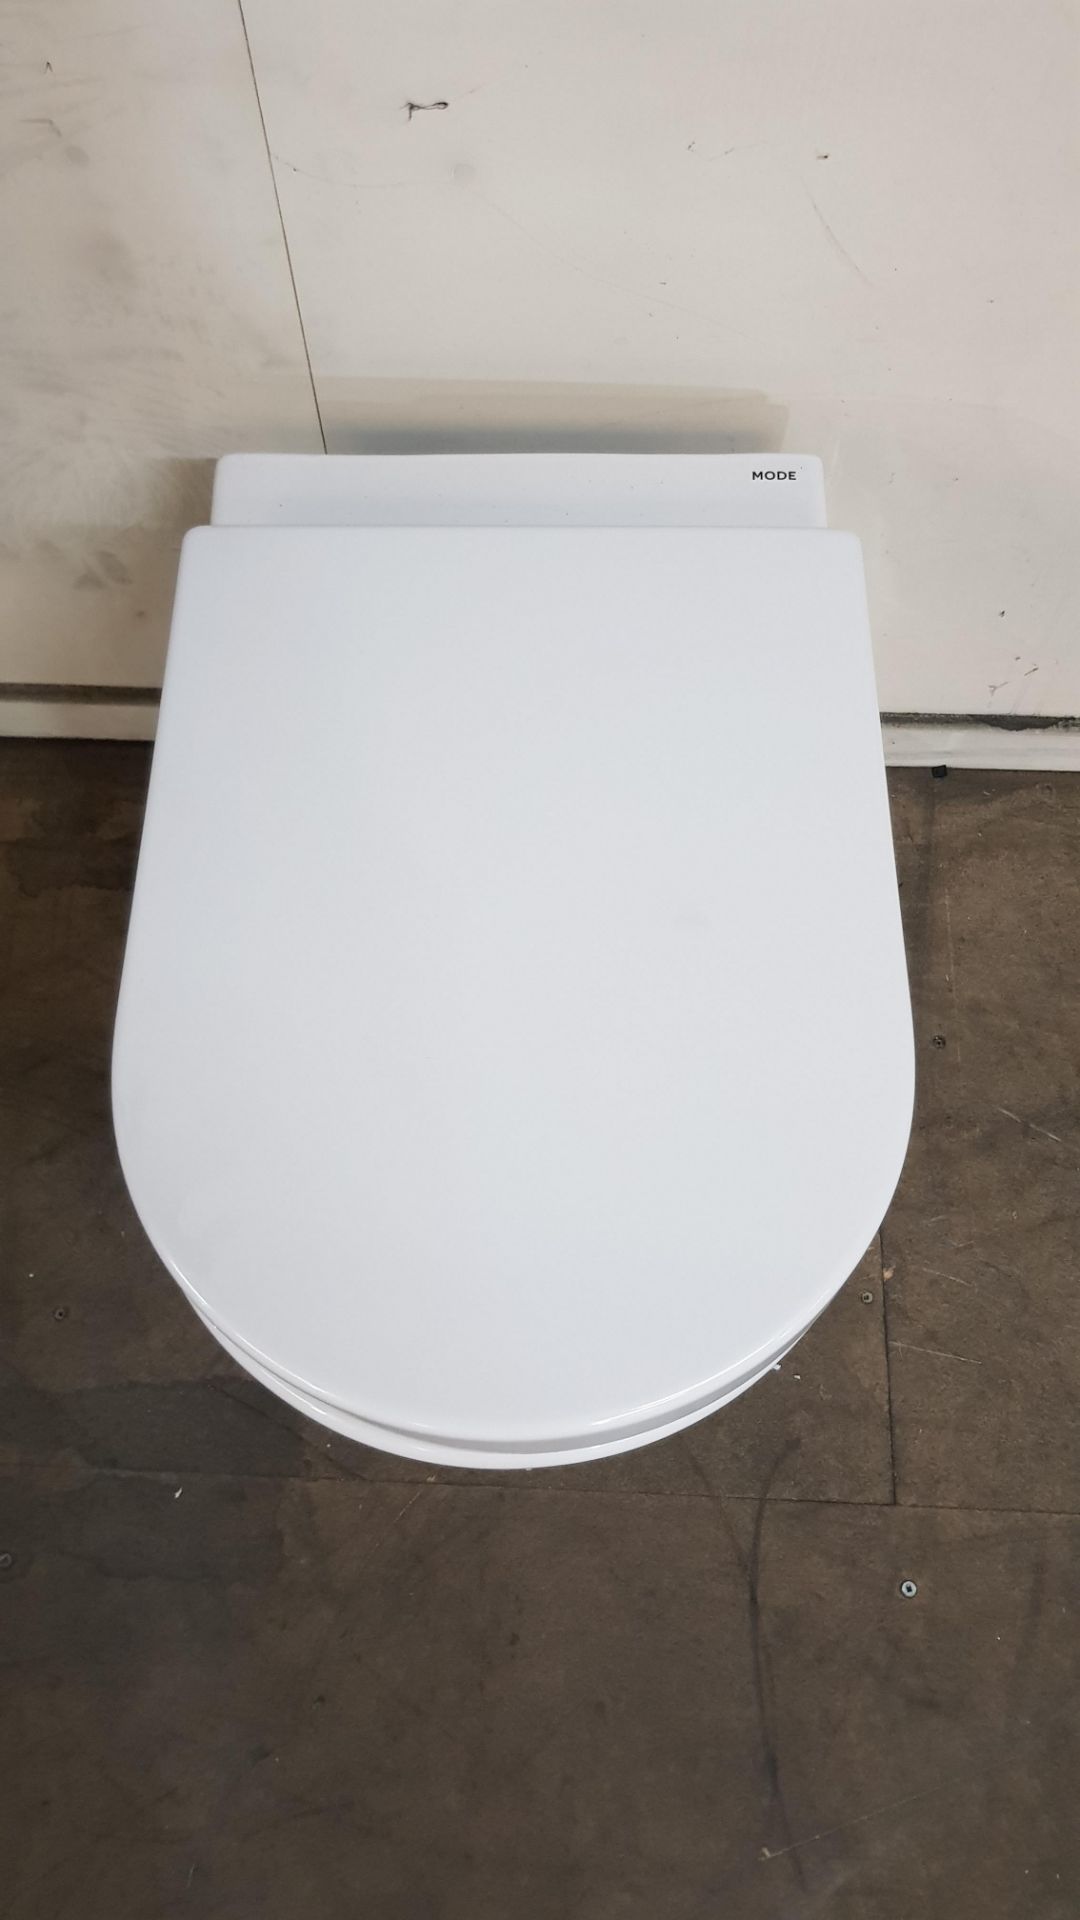 Mode Trim Back To Wall Toilet Pan With Seat - Image 3 of 6